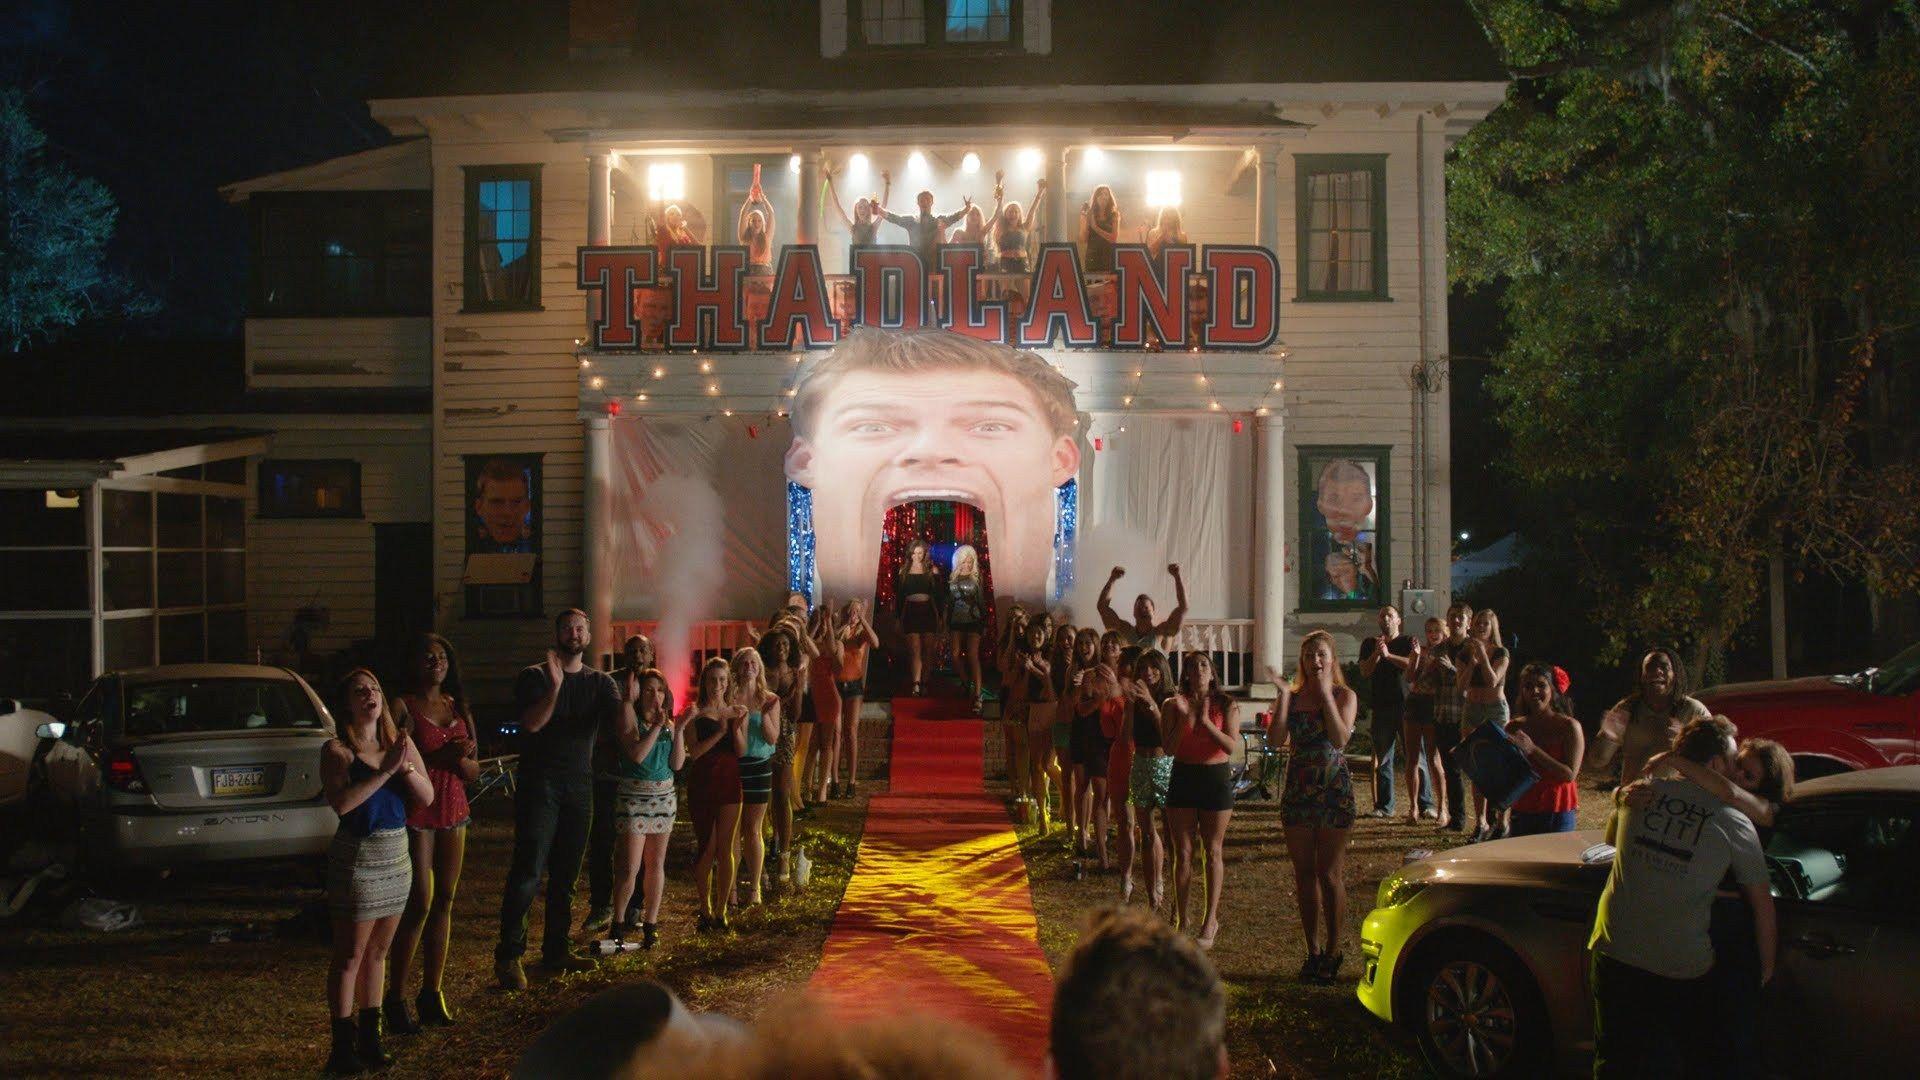 Blue Mountain State: The Rise Of Thadland' remains true to its TV